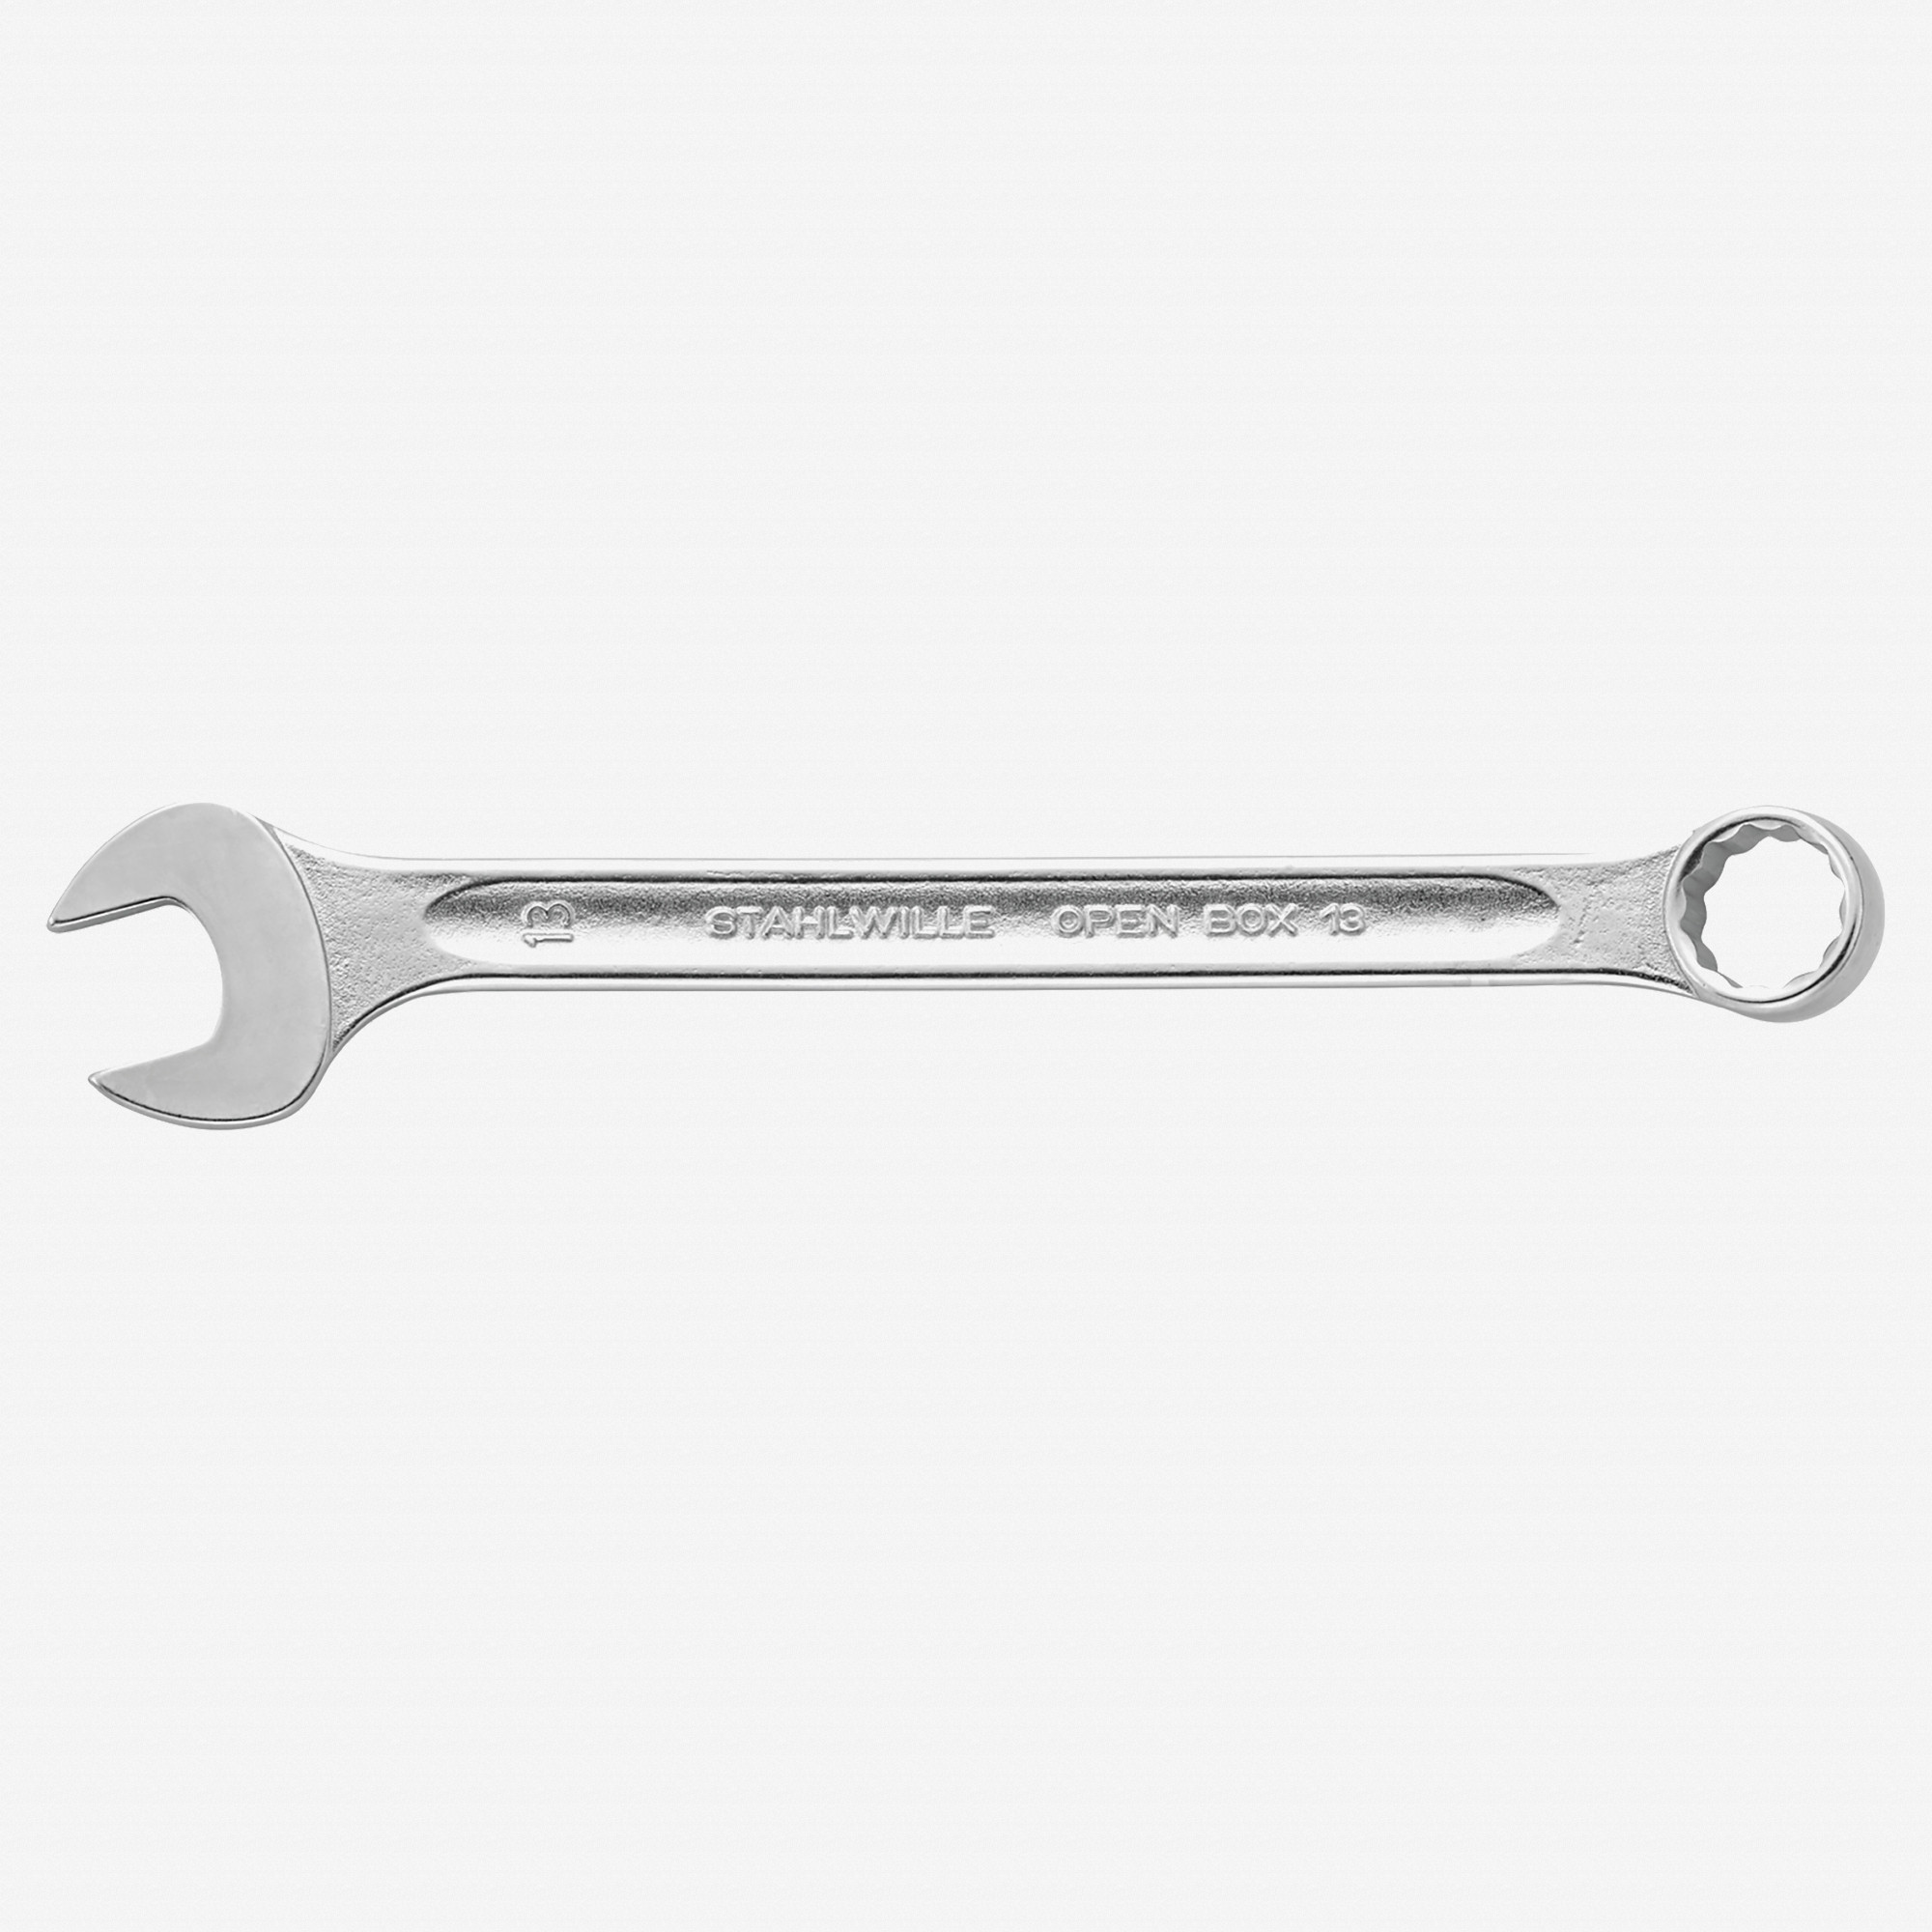 Stahlwille 10 Piece Combination Spanner Set | Combination Spanners